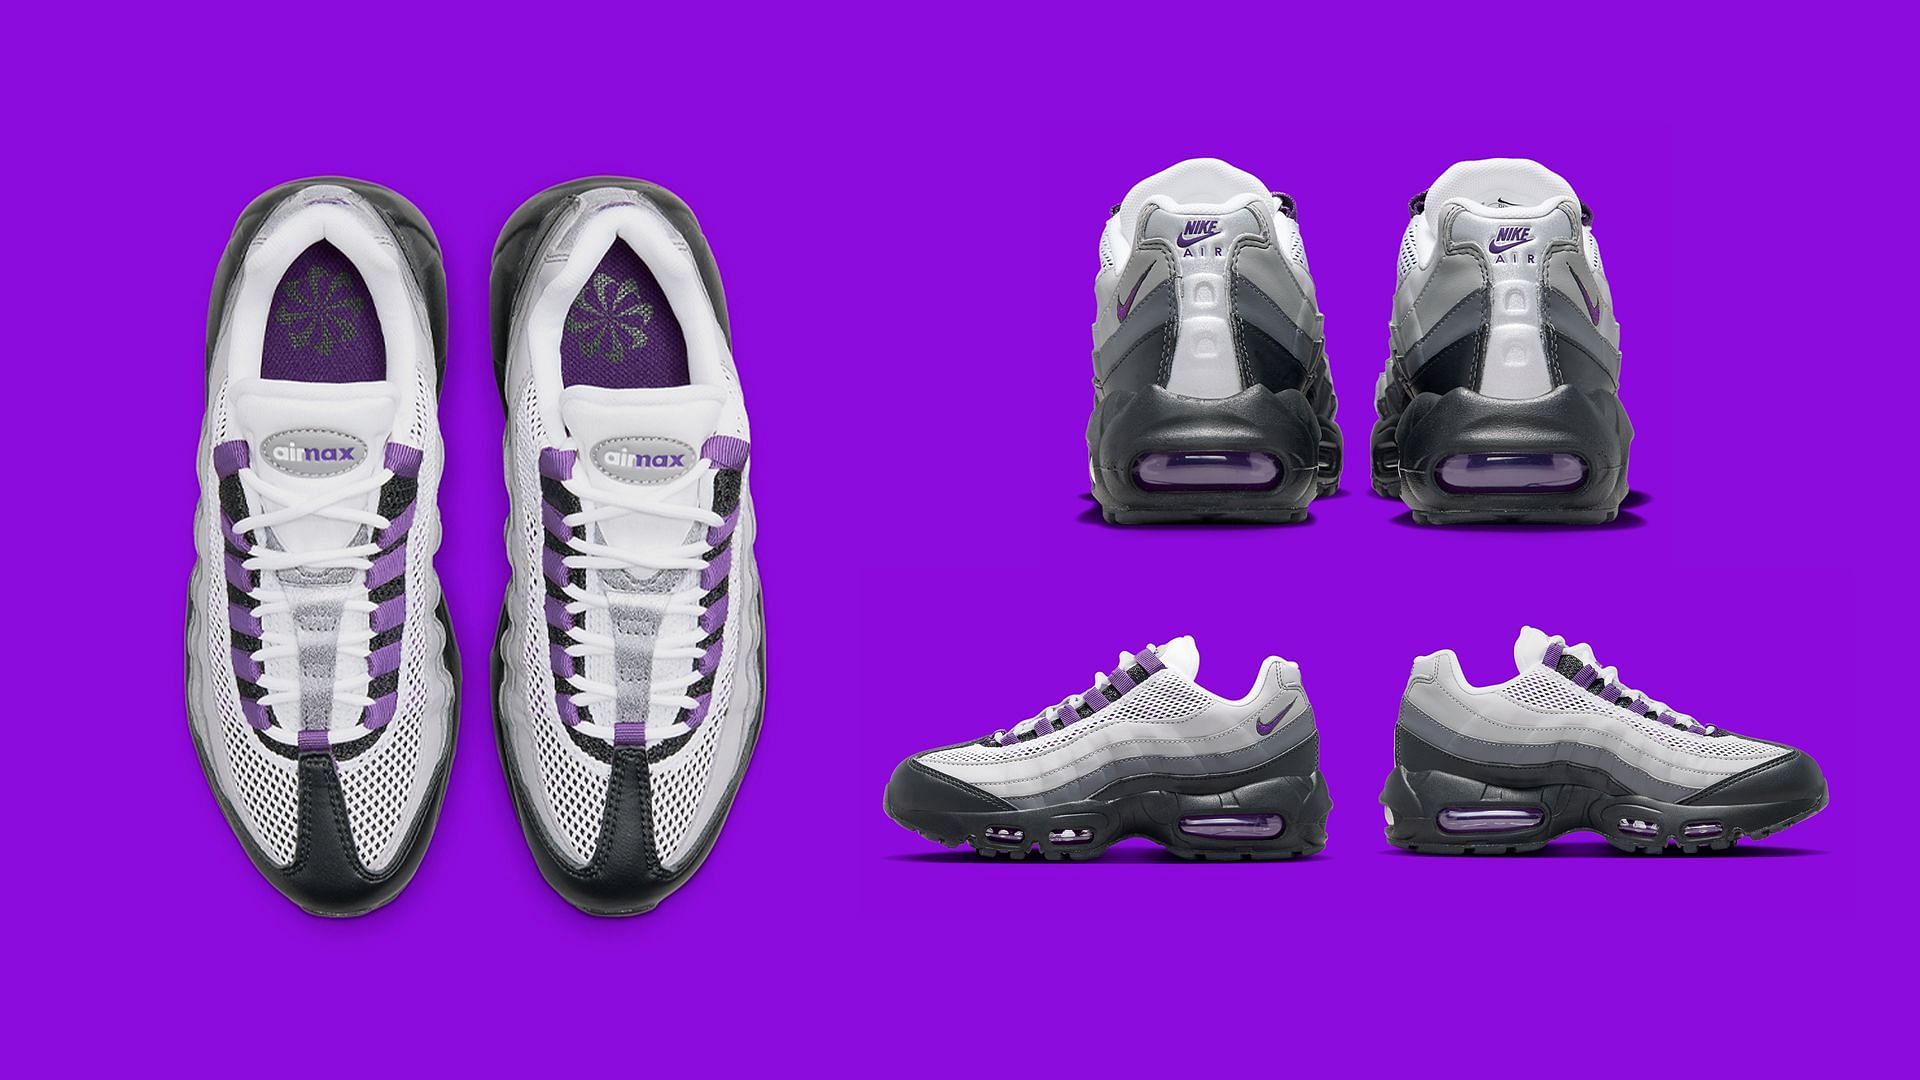 The upcoming Nike Air Max 95 &quot;Black Purple&quot; sneakers are slated to be released exclusively in women&#039;s sizes (Image via Sportskeeda)